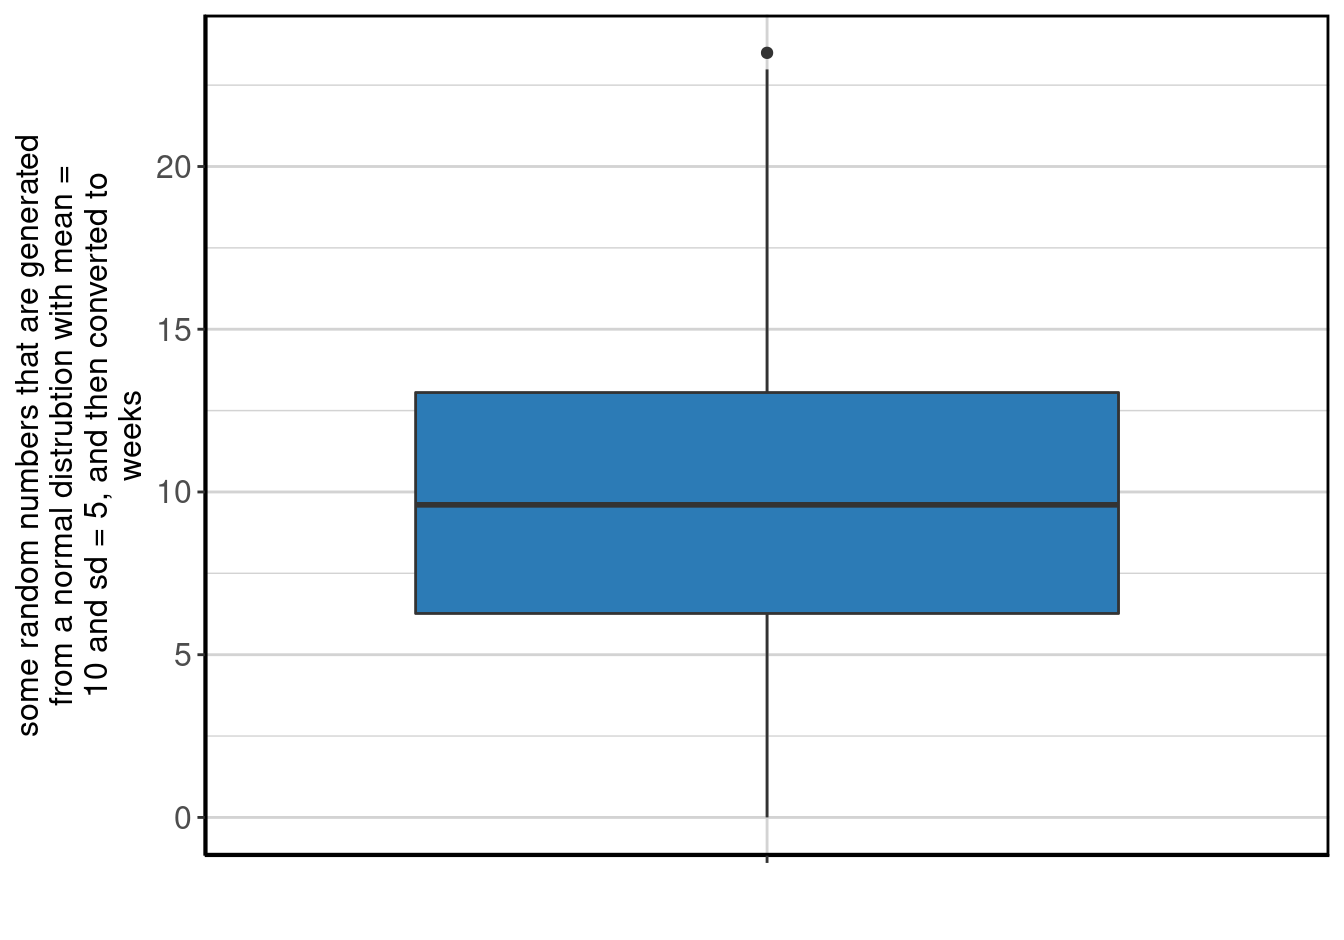 Boxplot of <b>some random numbers that are generated from a normal distrubtion with mean = 10 and sd = 5, and then converted to weeks</b>.